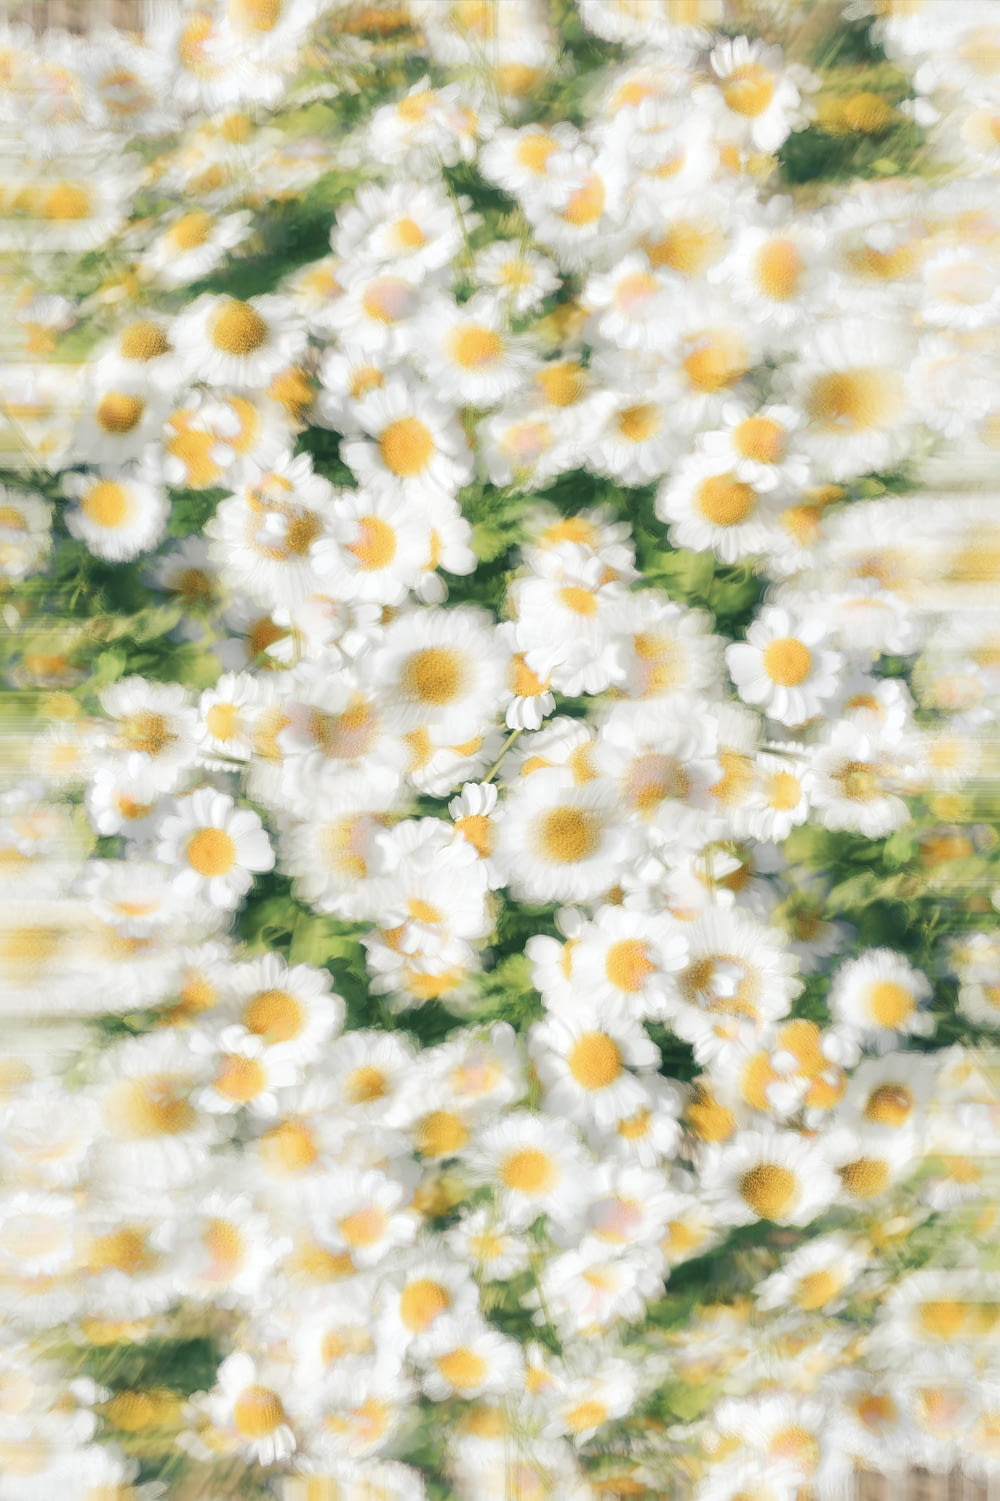 a picture of a bunch of daisies in a vase